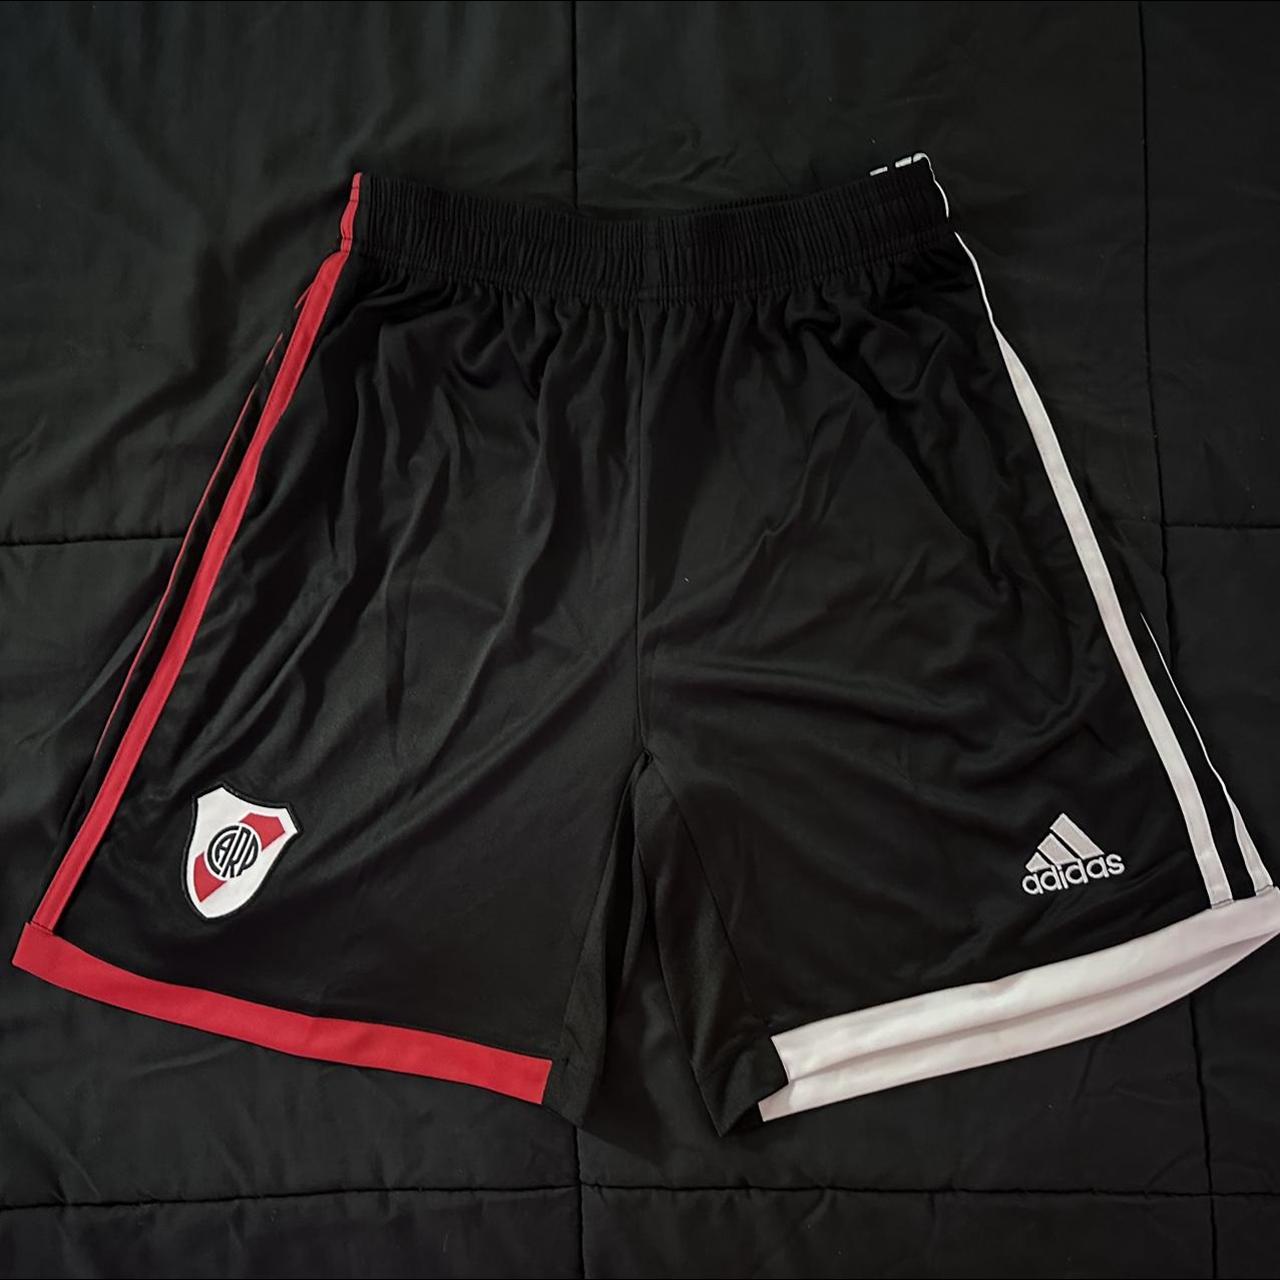 River plate shorts #riverplate Size S 2023 - Depop